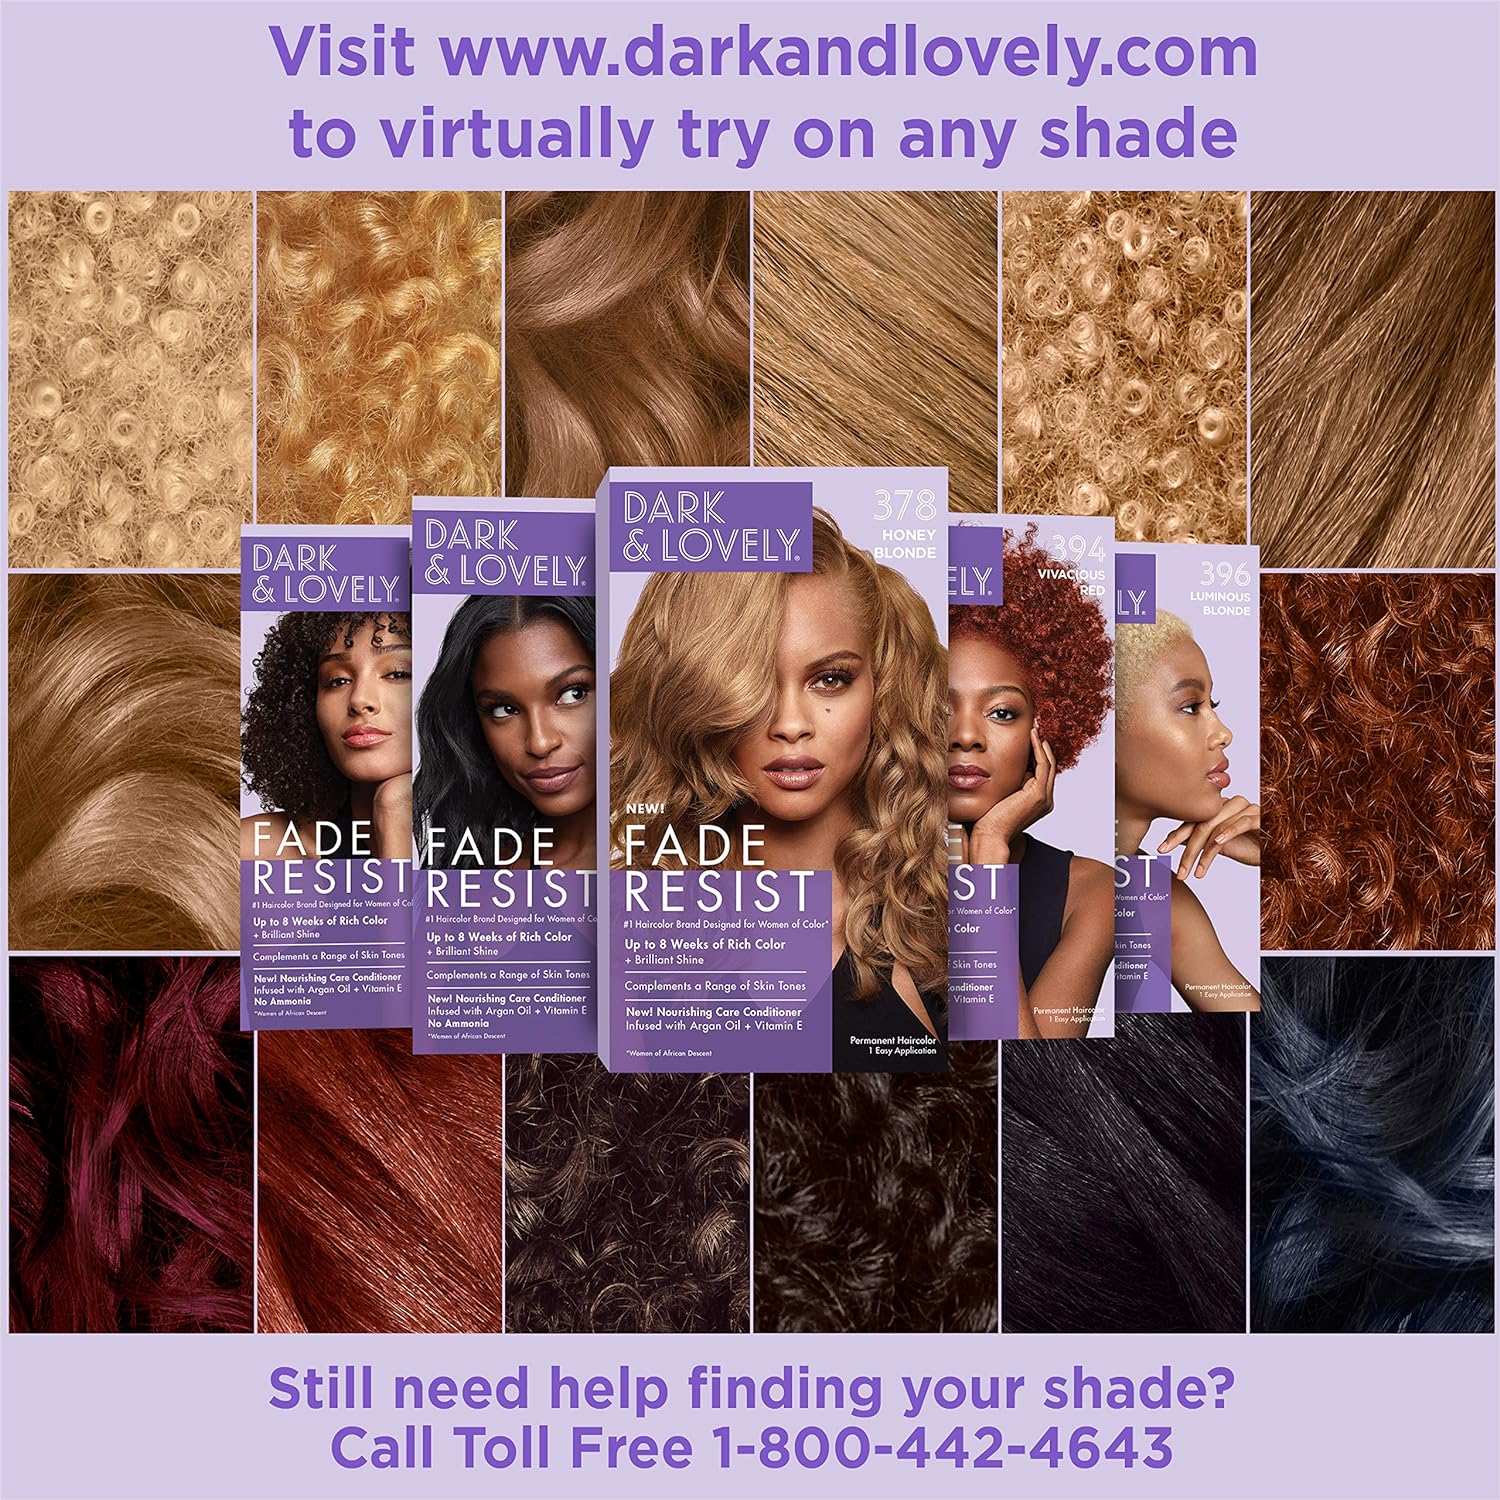 SoftSheen-Carson Dark and Lovely Fade Resist Rich Conditioning Hair Color, Permanent Hair Color, Up To 100 percent Gray Coverage, Brilliant Shine with Argan Oil and Vitamin E, Rich Auburn : Chemical Hair Dyes : Beauty & Personal Care